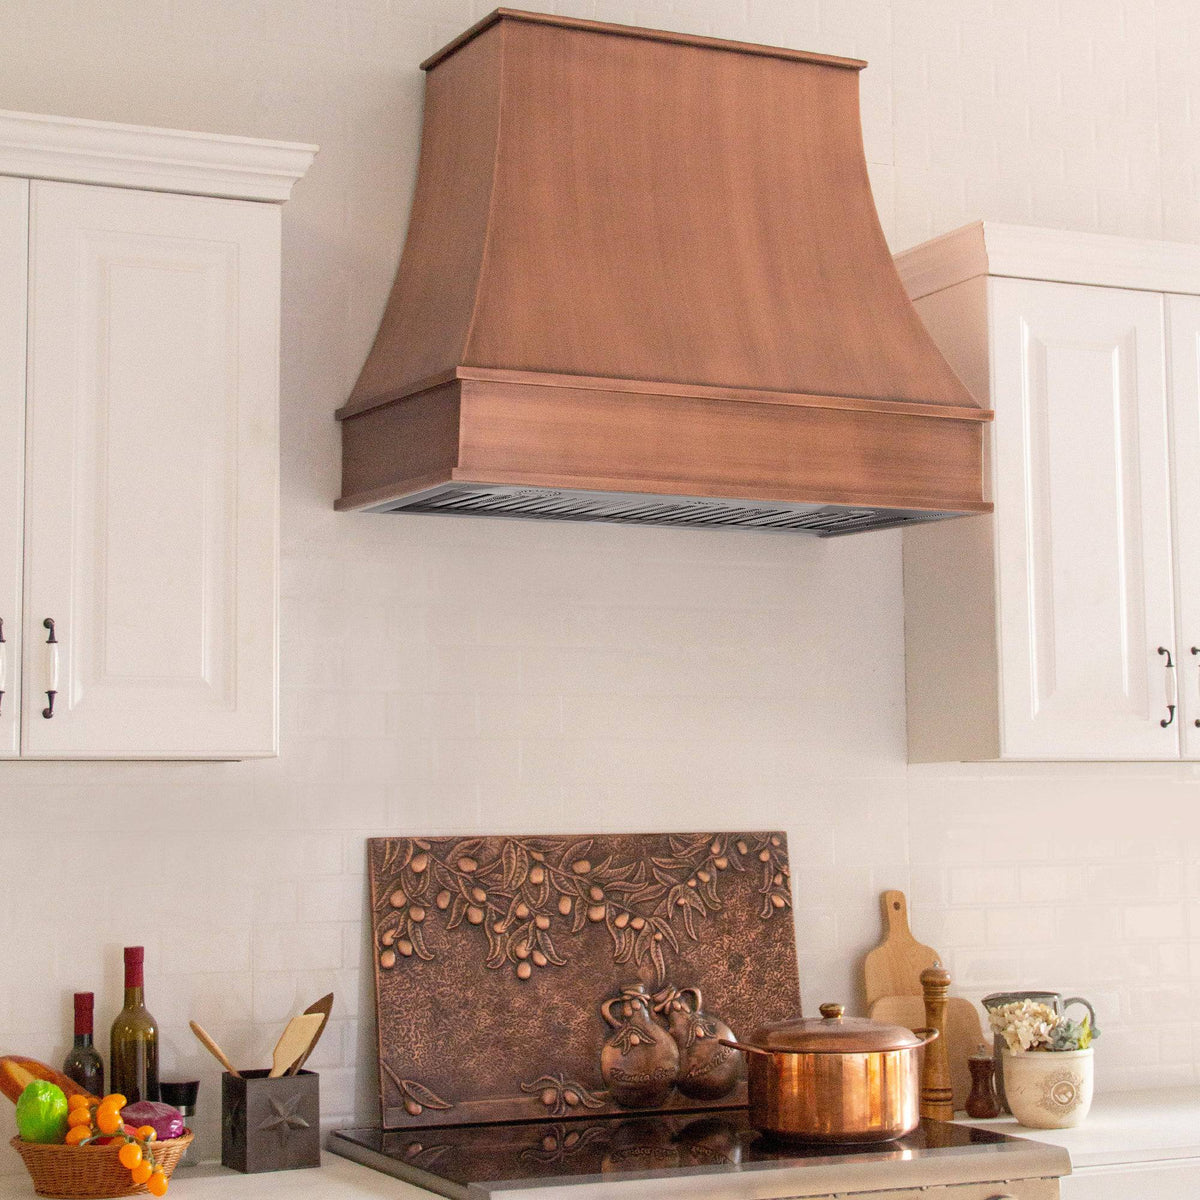 Fobest Tuscan Smooth Antique Copper Range Hood FCP-66